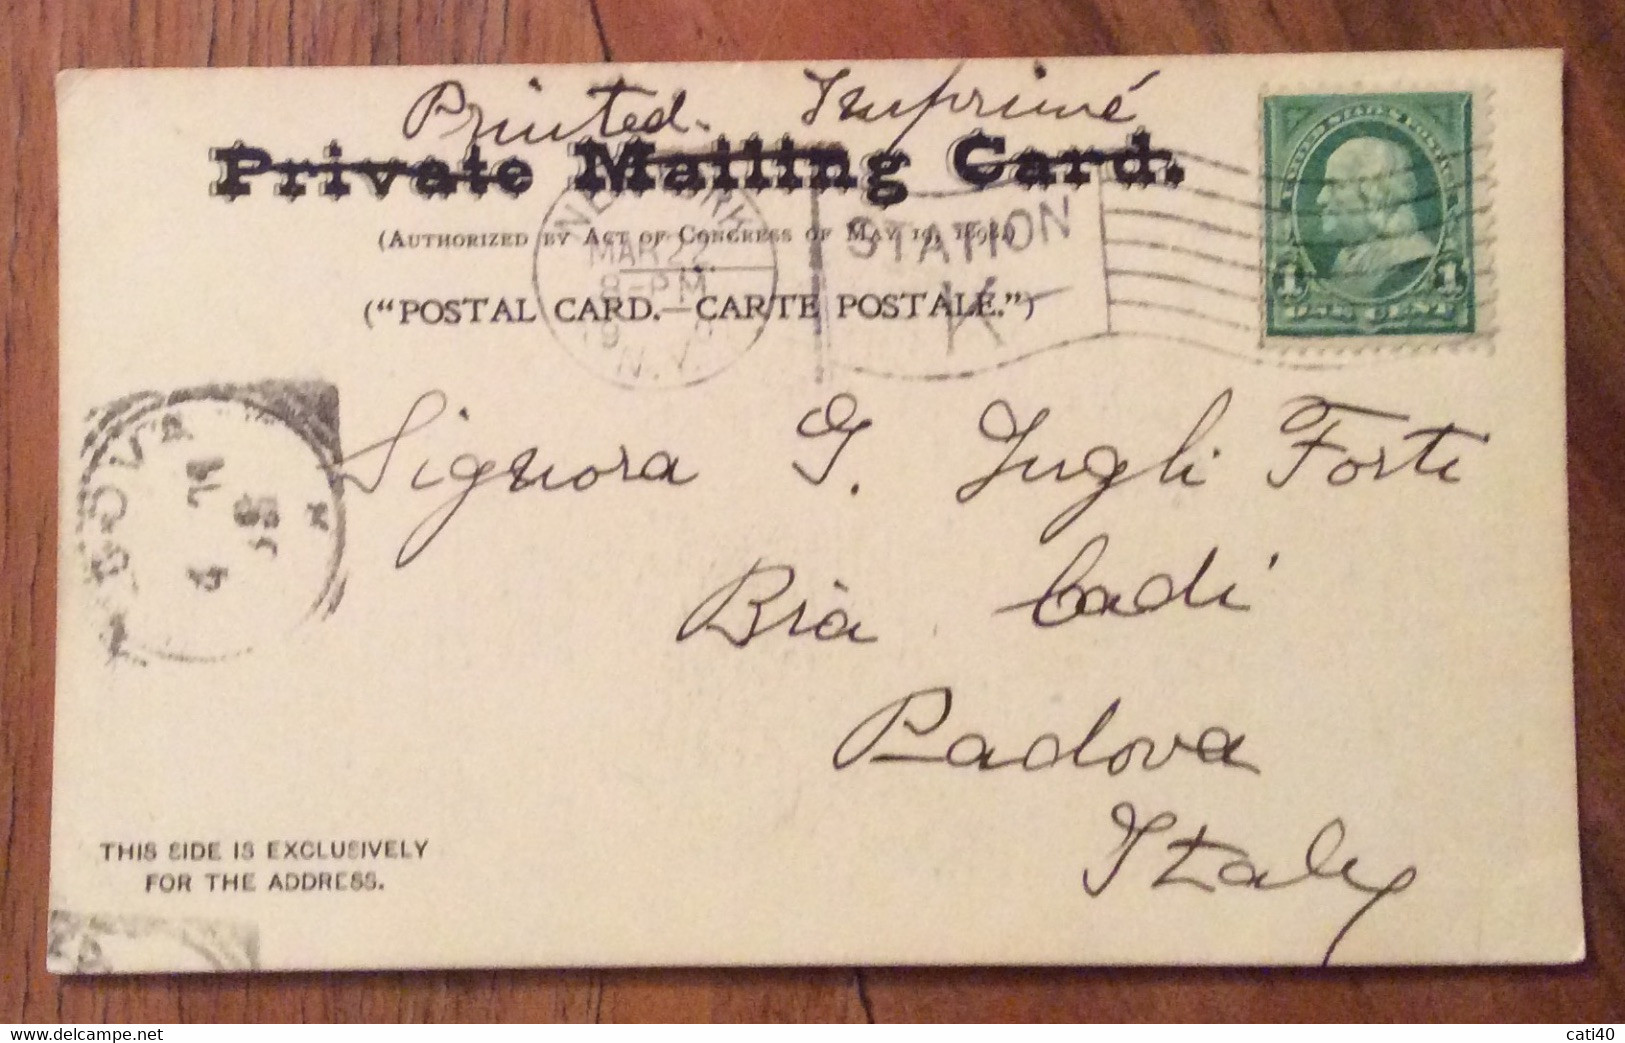 U.S.A. - PRIVATE MAILING CARD -  CITY HALL AND SURROUNDINGS - TO PADOVA ITALY MAR 22  1900 - Cape Cod